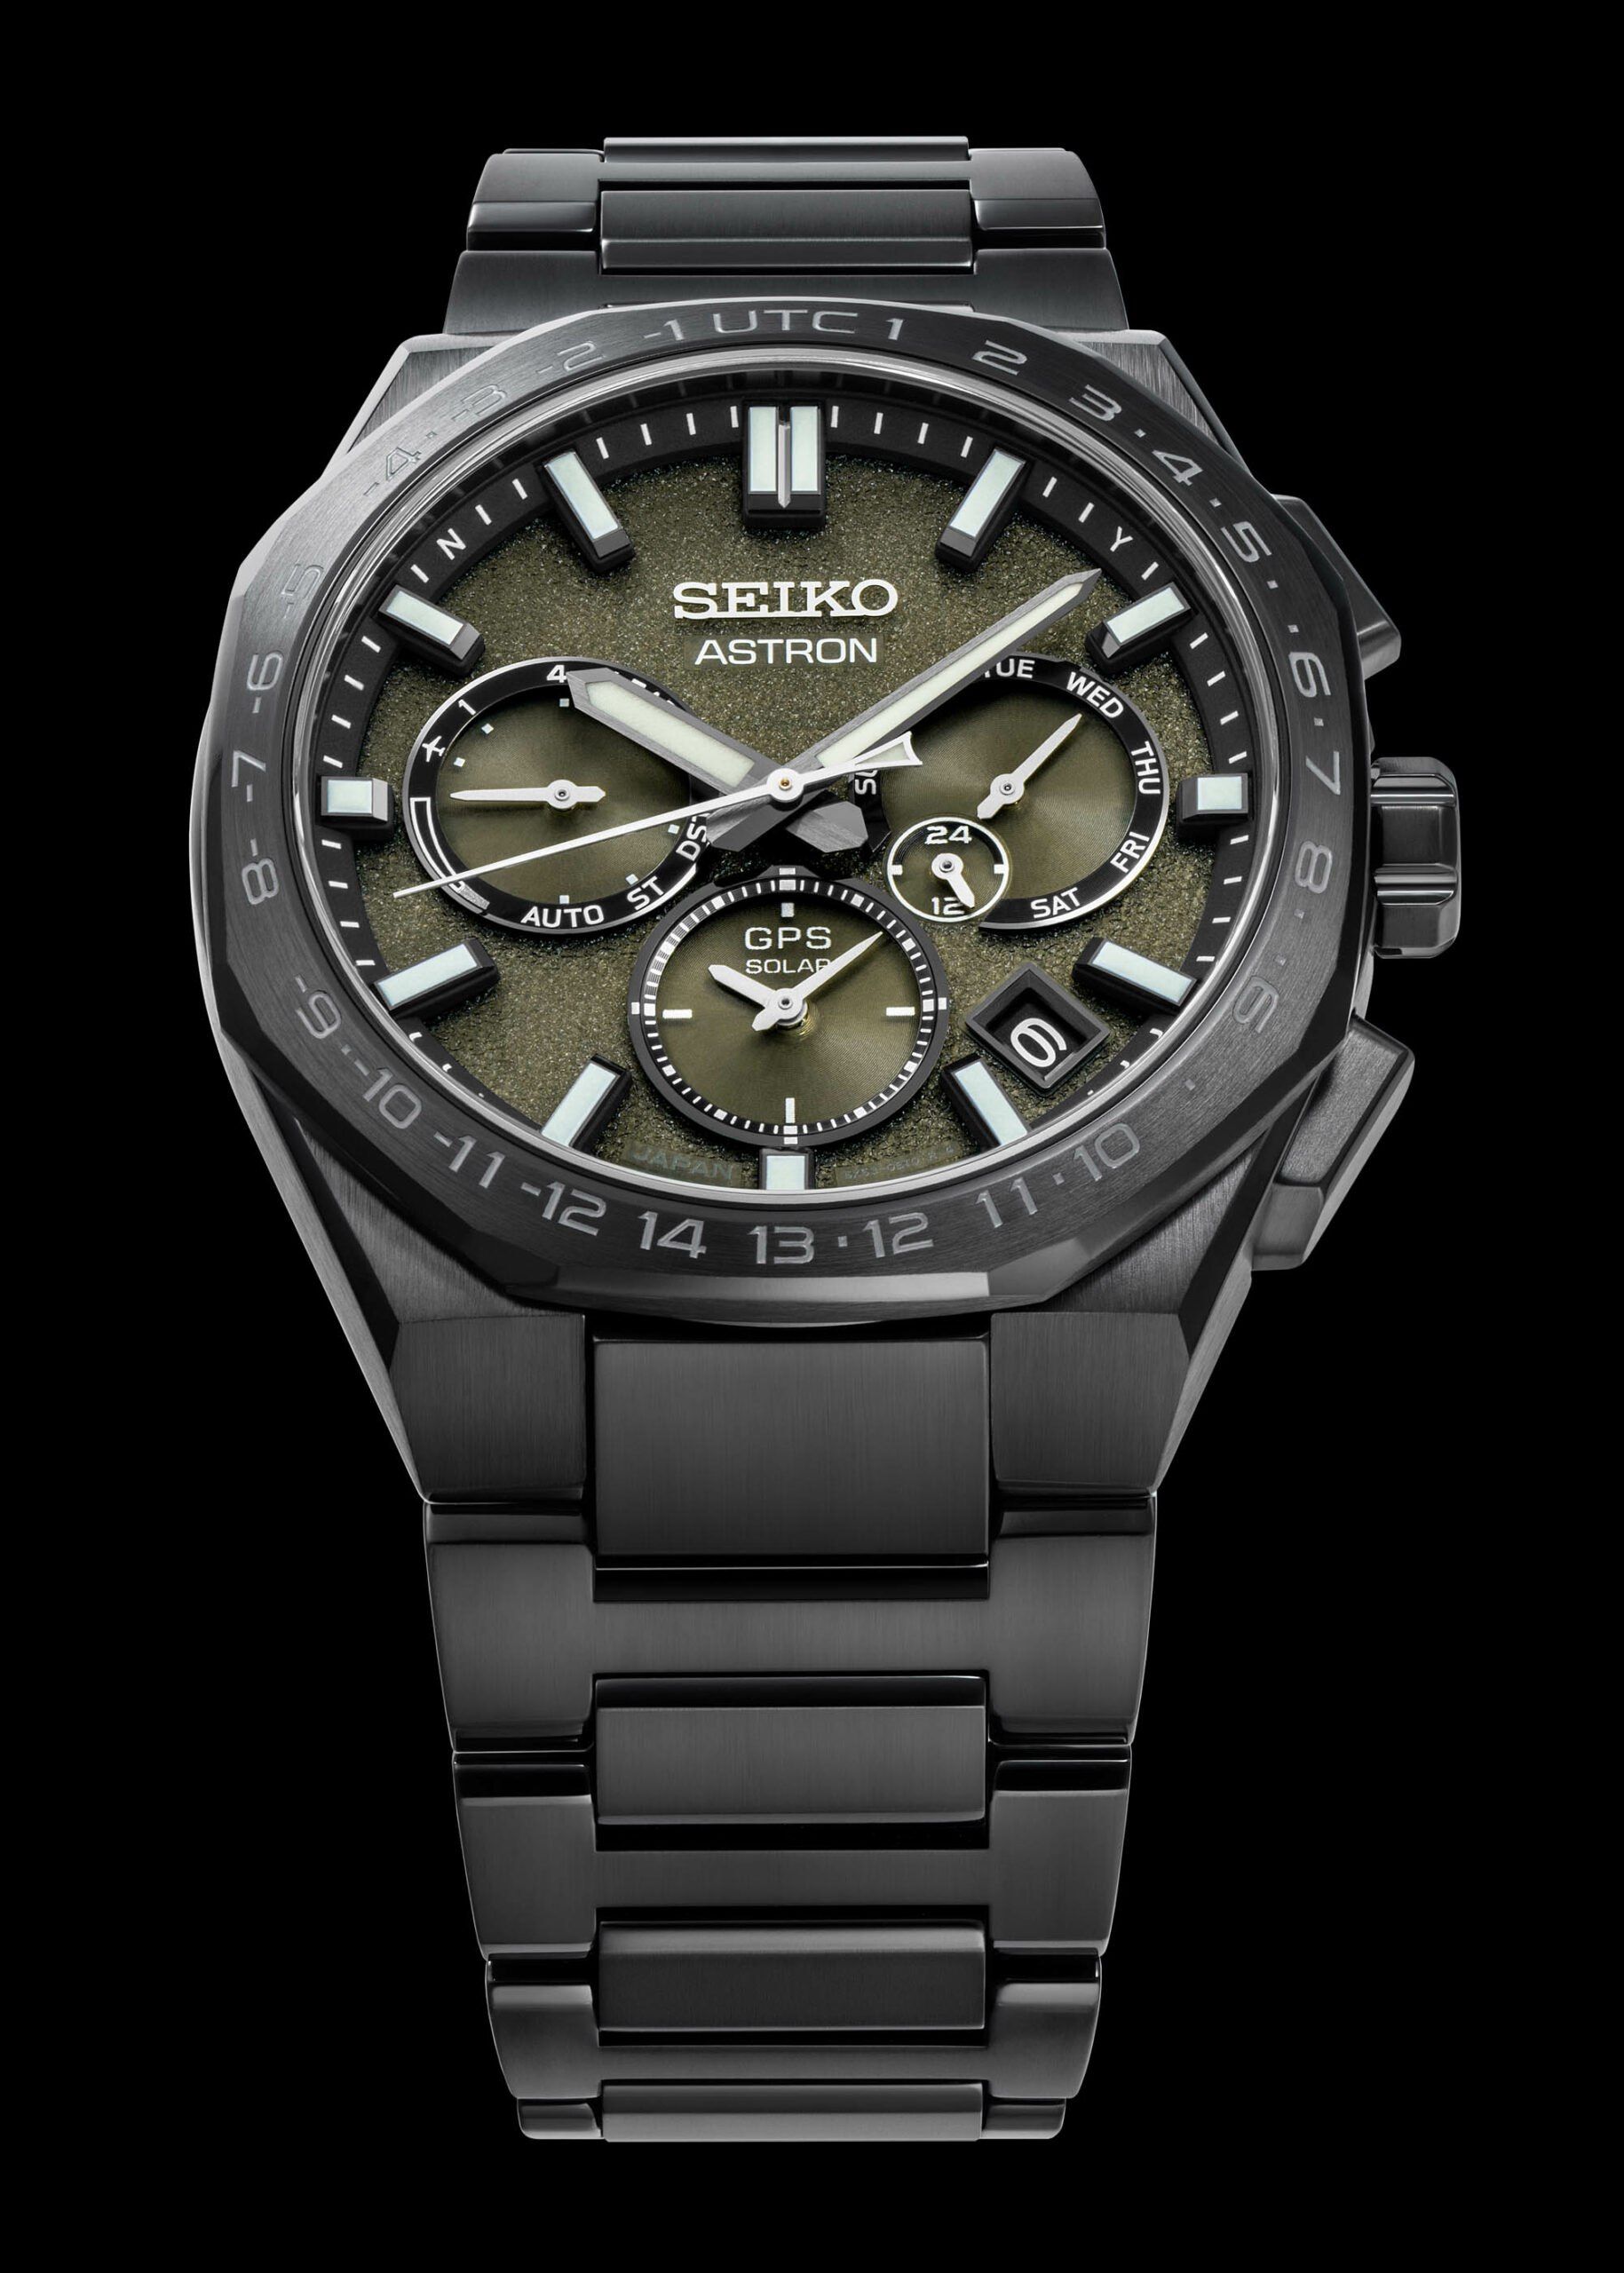 Seiko Astron GPS Solar Resident Evil Death Island Collaboration Limited Edition Watches 9 scaled